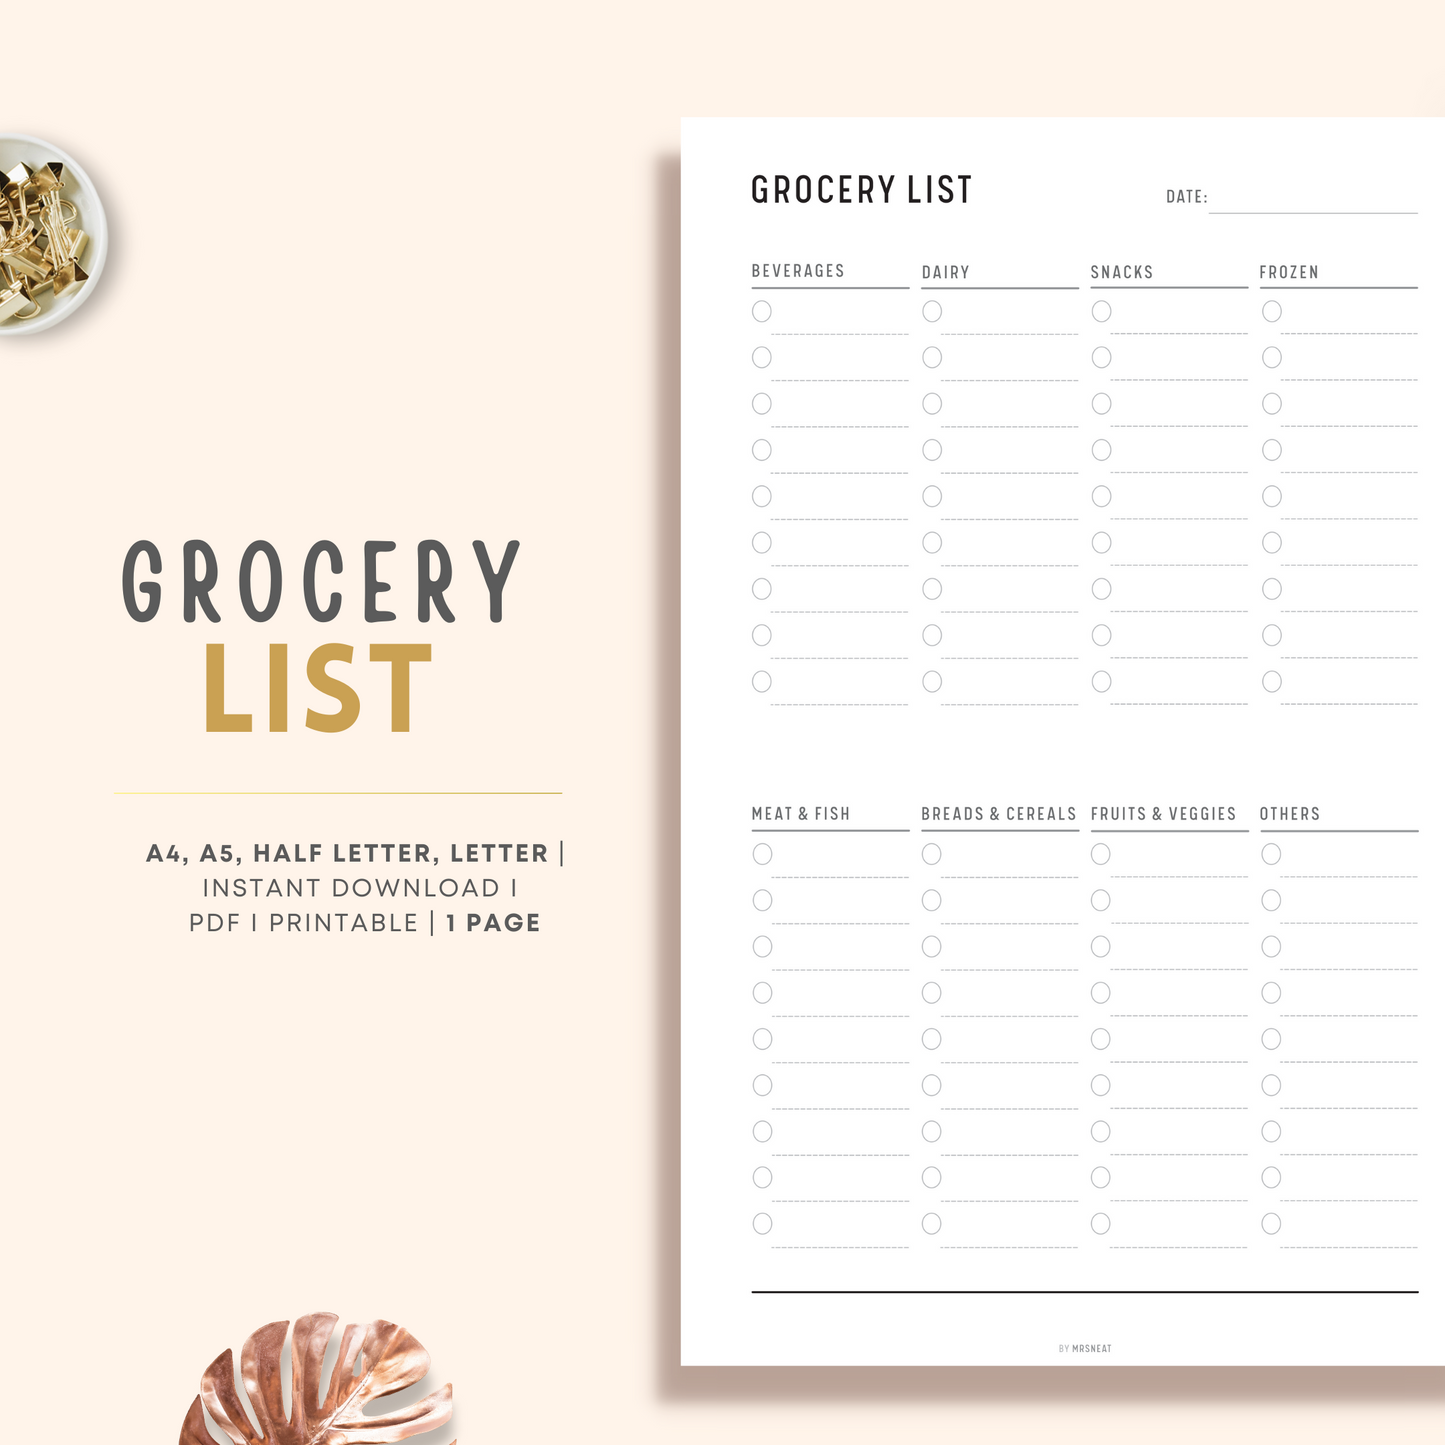 Minimalist and Clean Grocery List Planner with 8 shopping categories